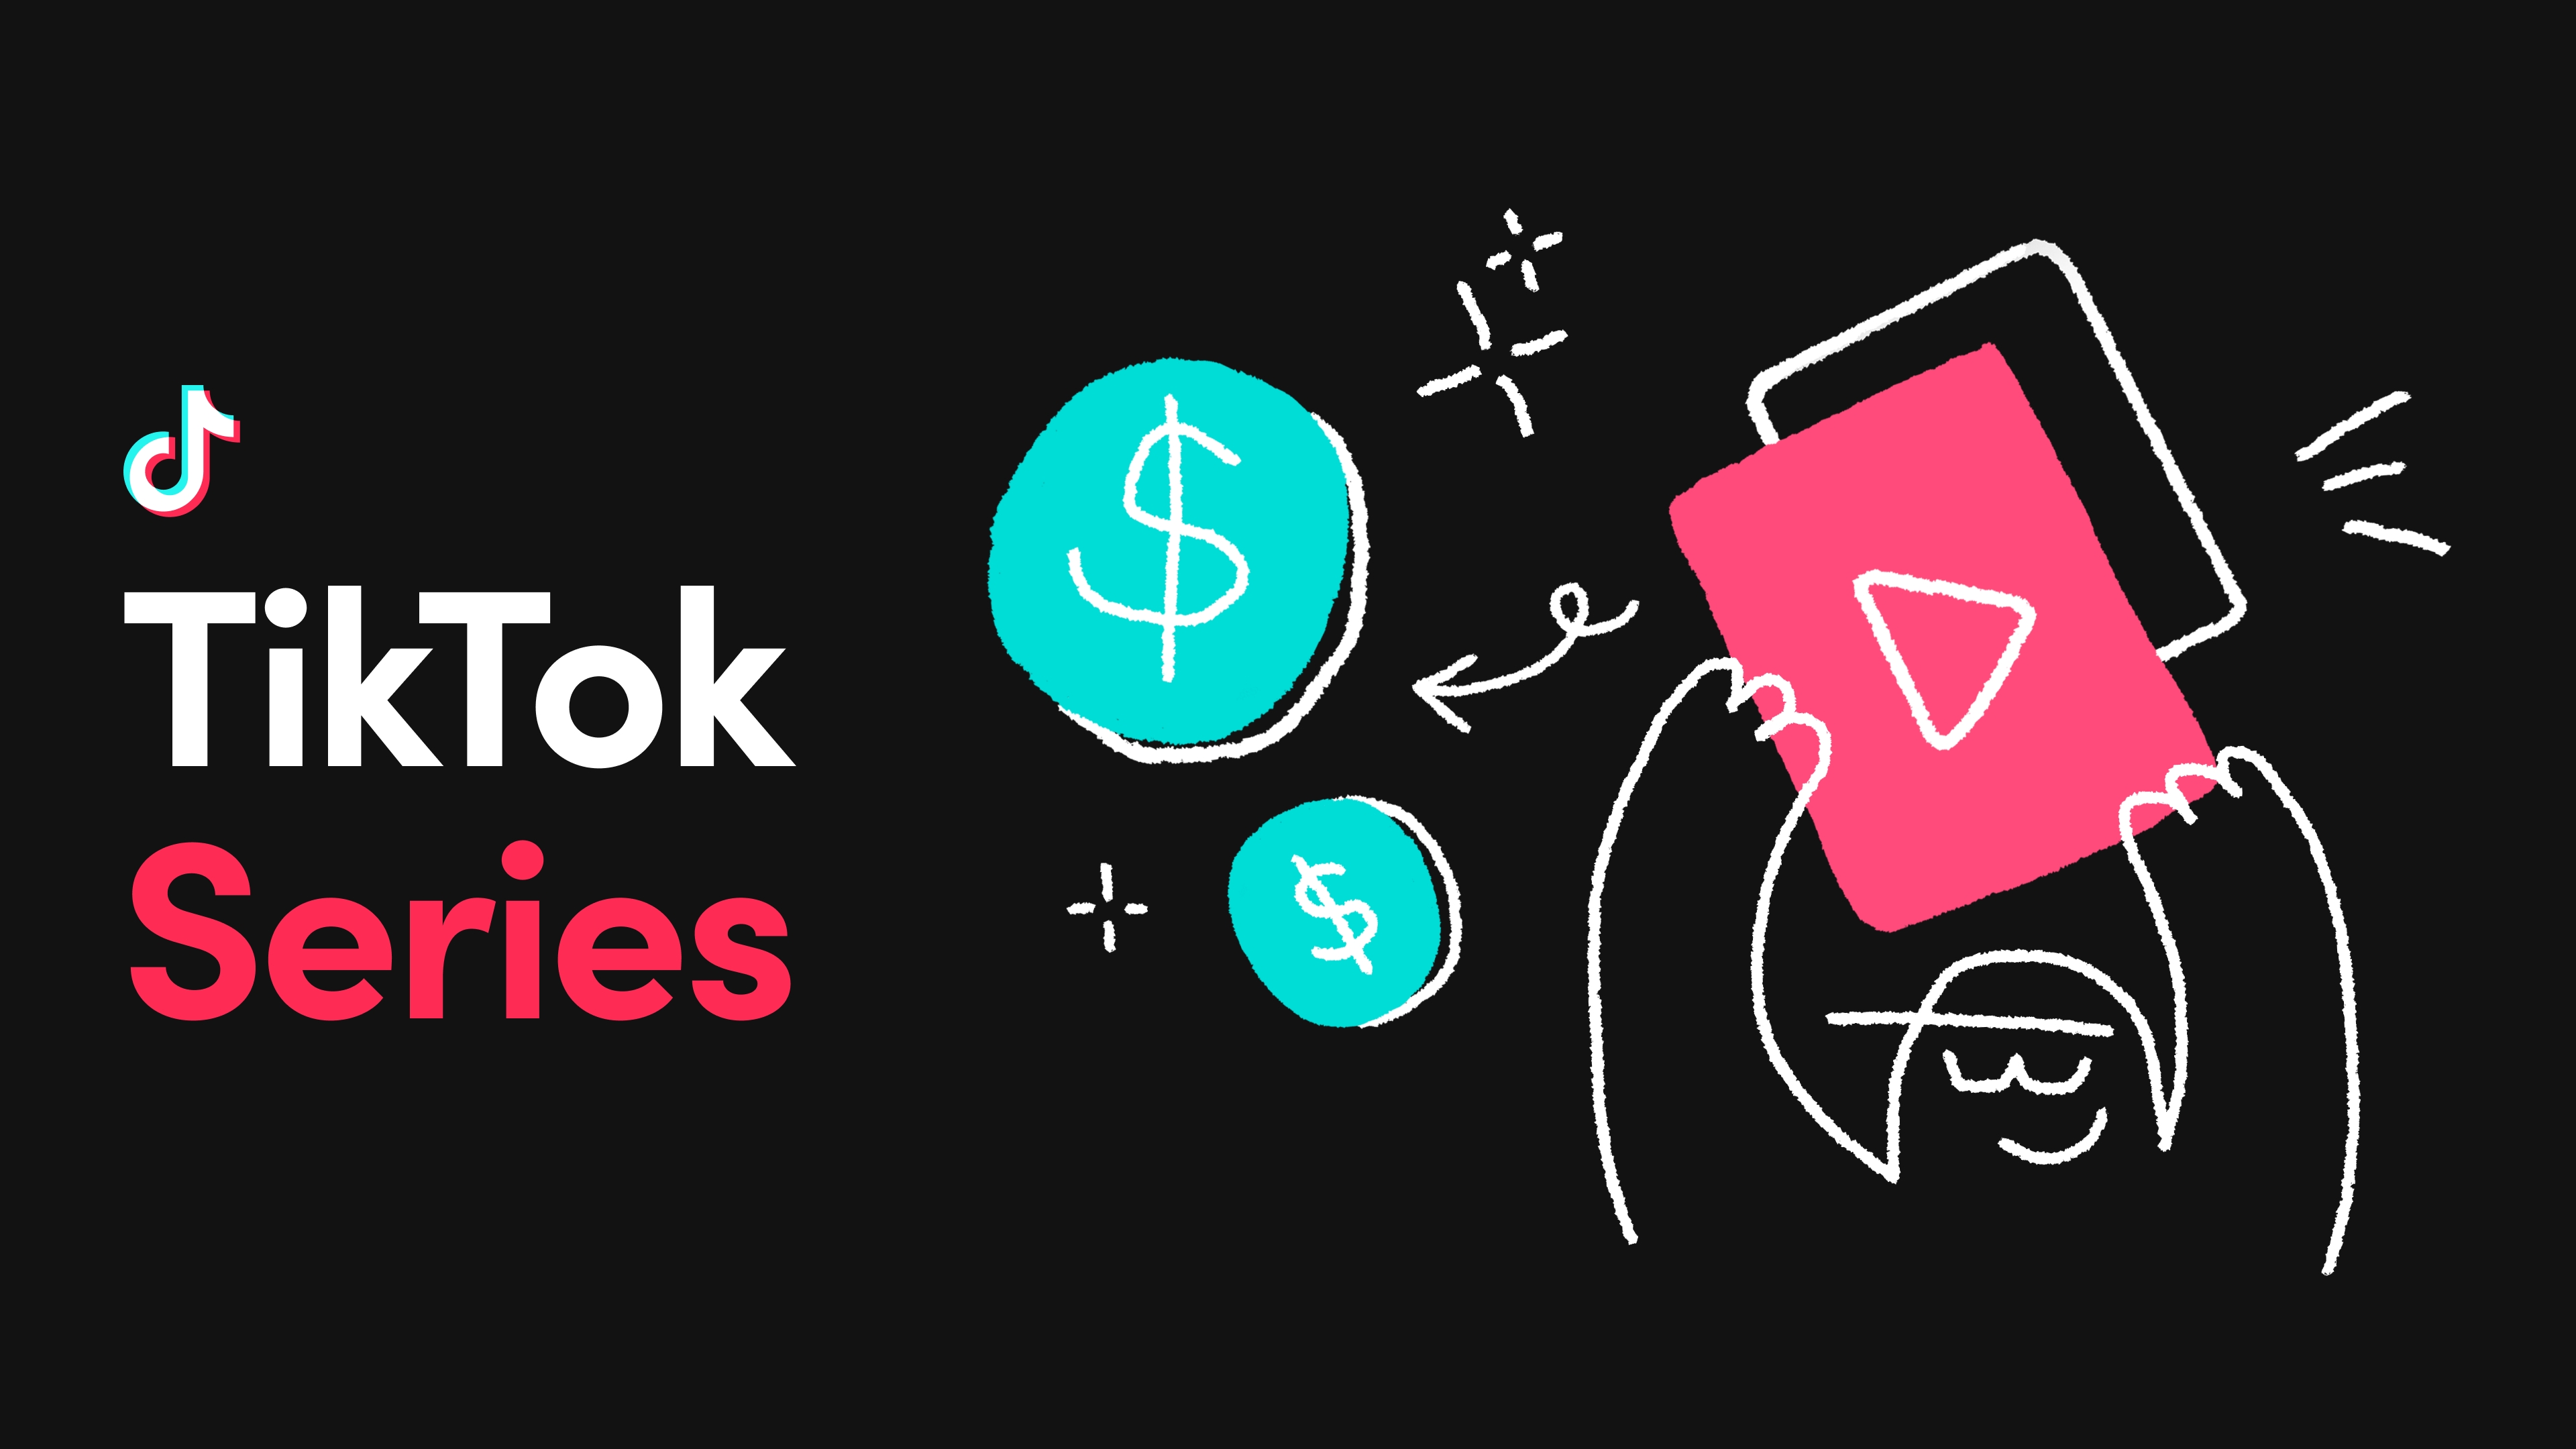 A playful illustration showcases the concept of "TikTok Series" with symbols of monetization and a figure holding up a device displaying a play button.